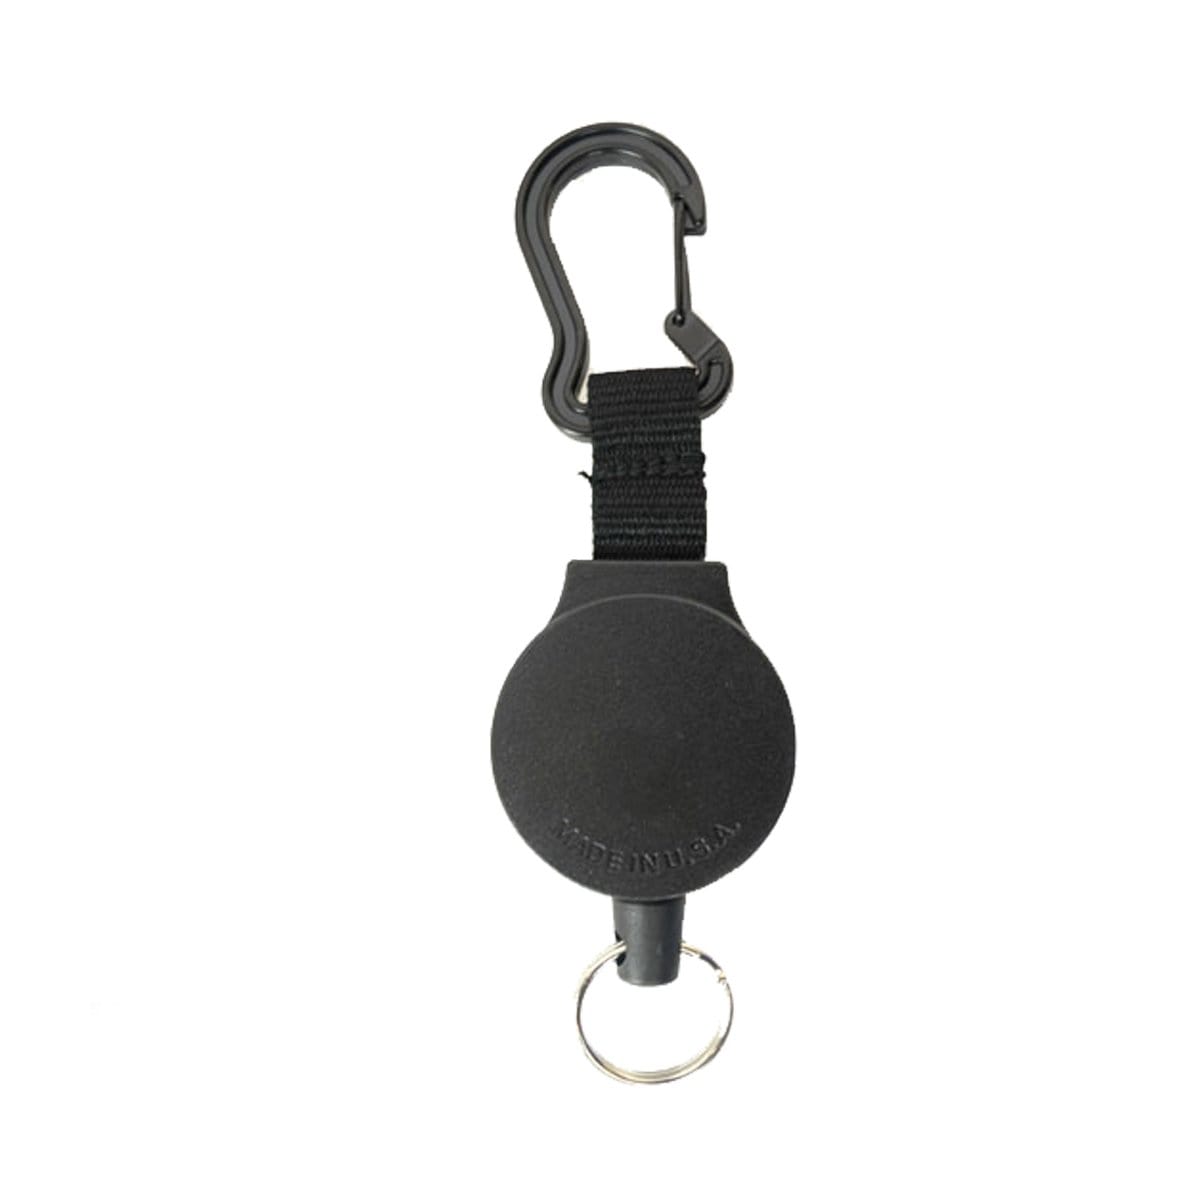 Heavy Duty Spid Key-Bak Mid-Size Carabiner Retractable Badge Reel with Card Strap & Key Ring (SPID-3330)